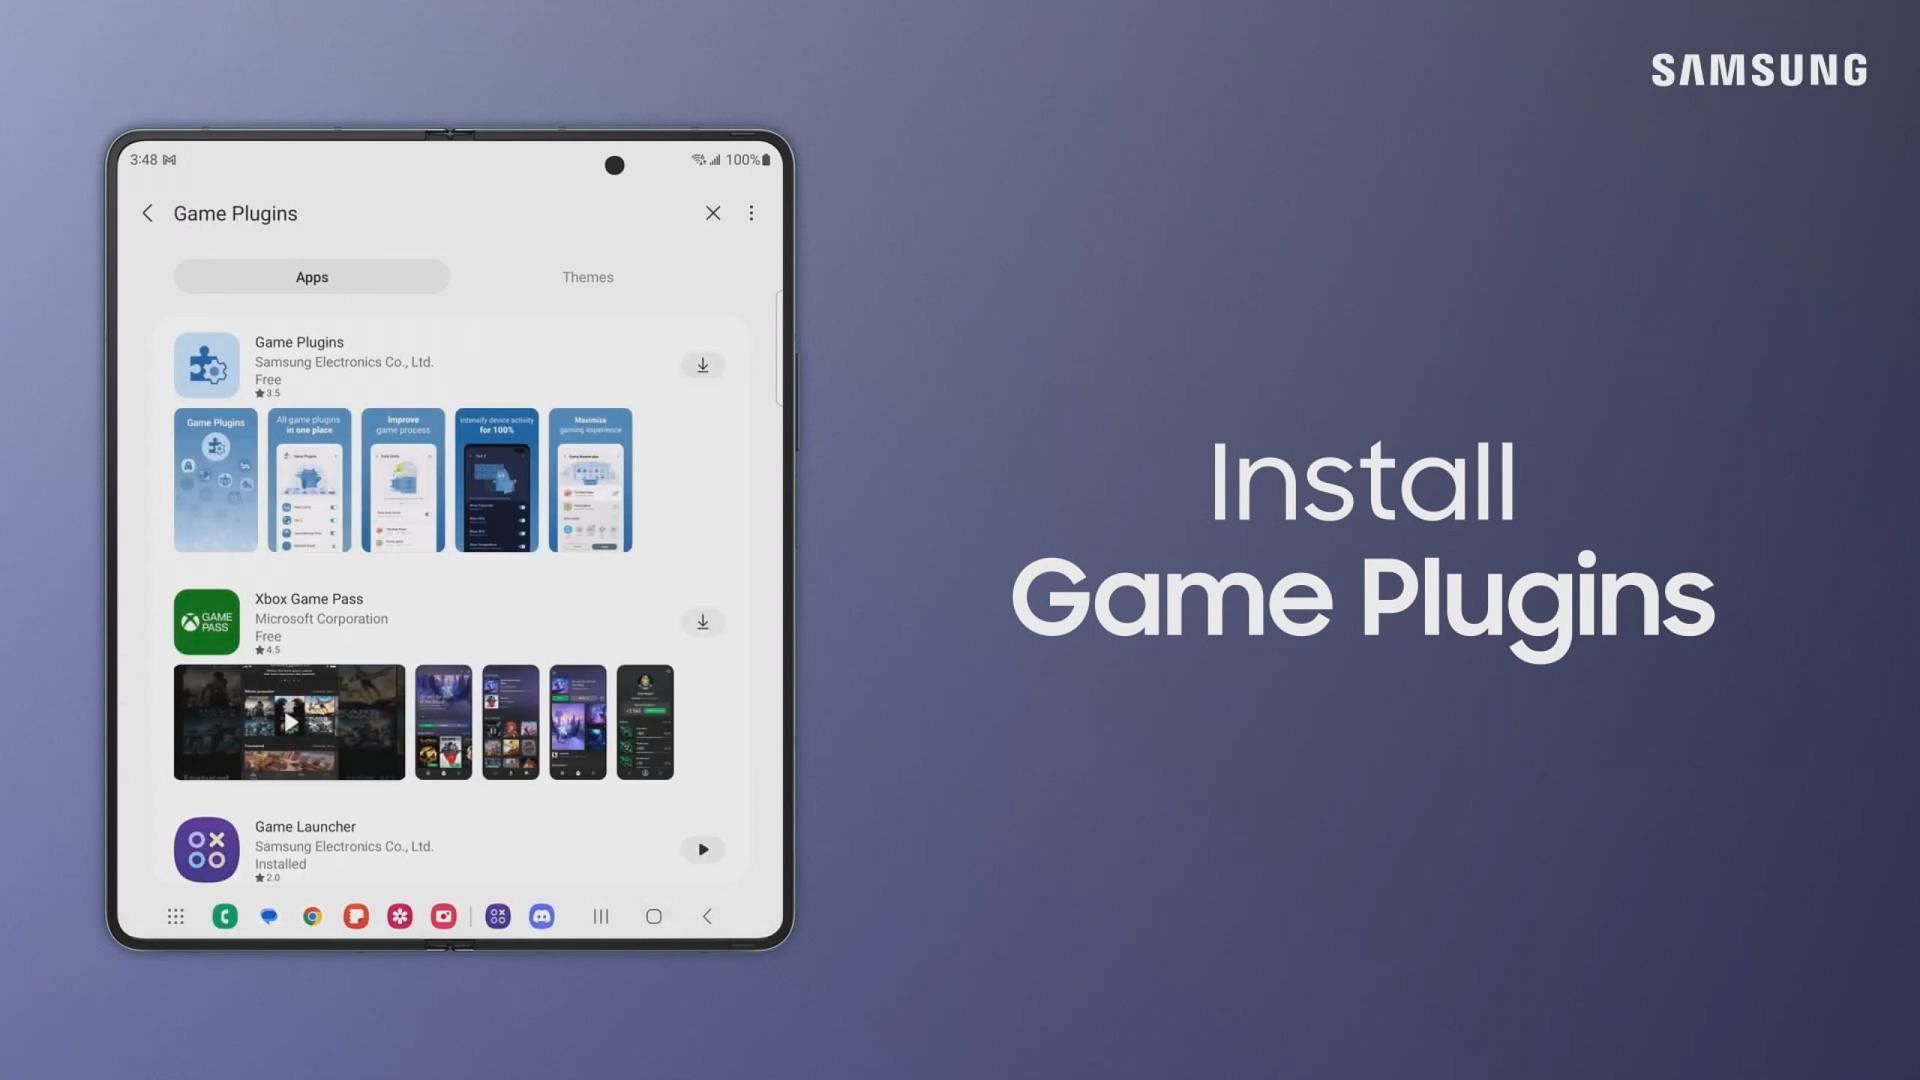 Game Plugins app in the Galaxy Store (Image via @Samsung Care/YouTube)